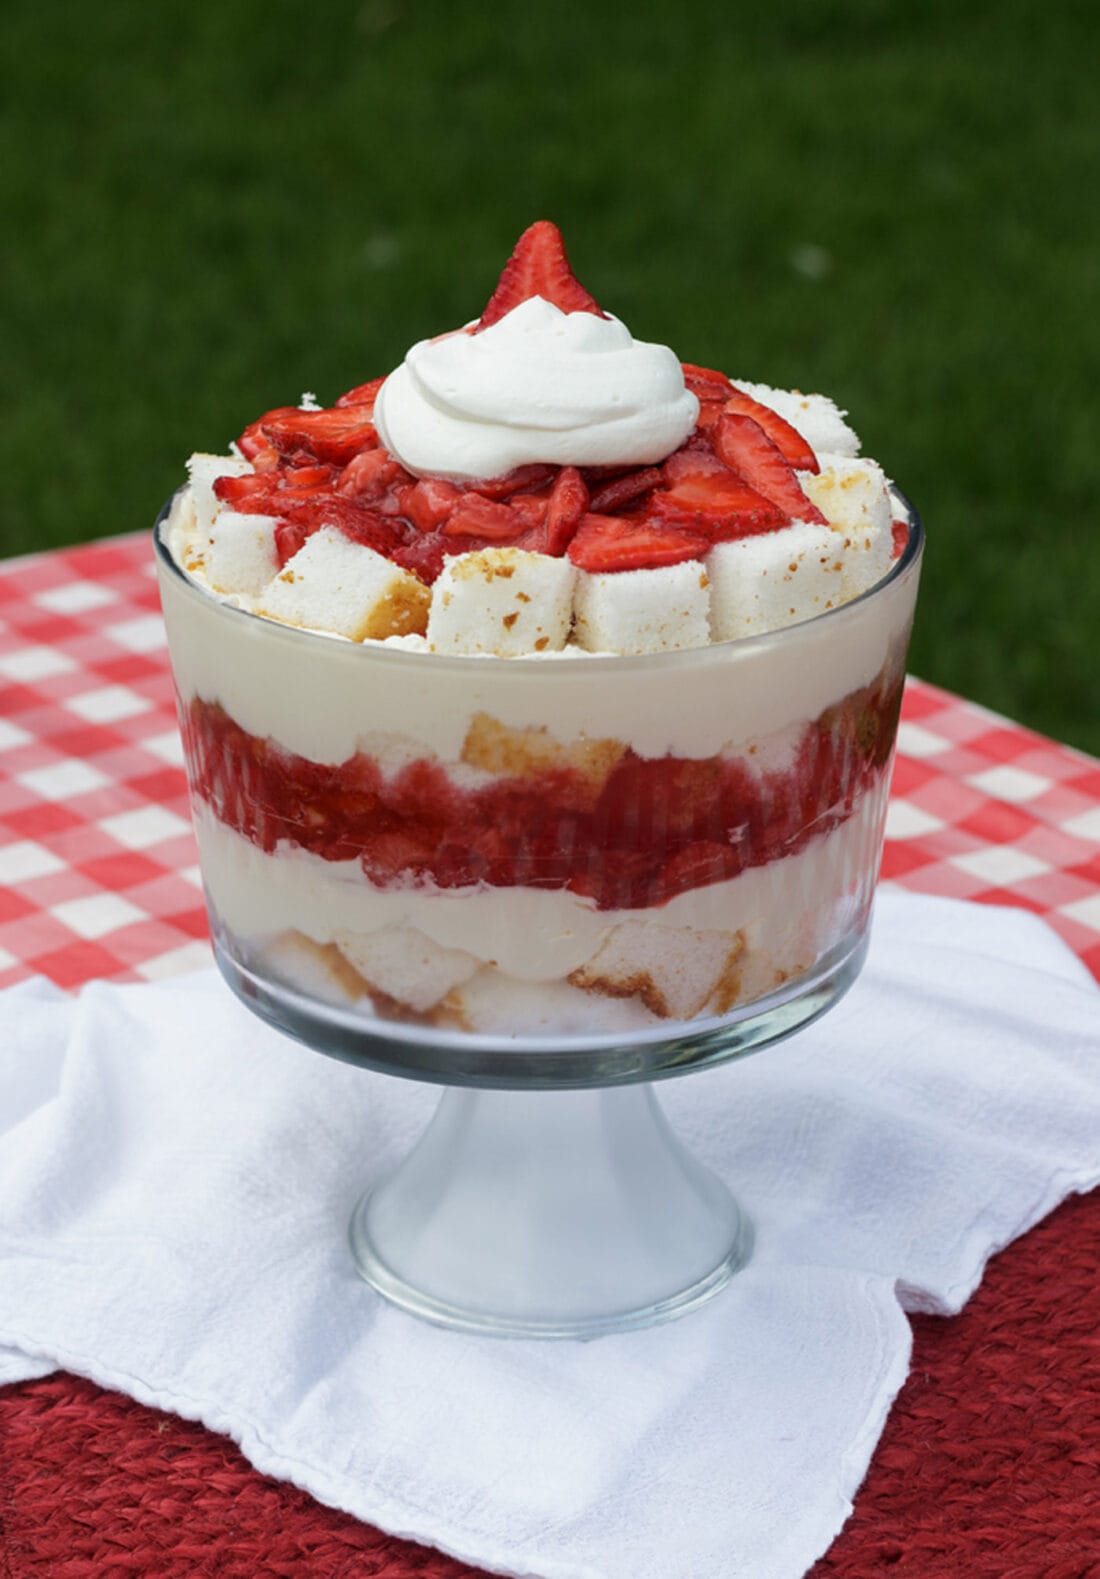 Strawberry Shortcake Trifle resting on a table